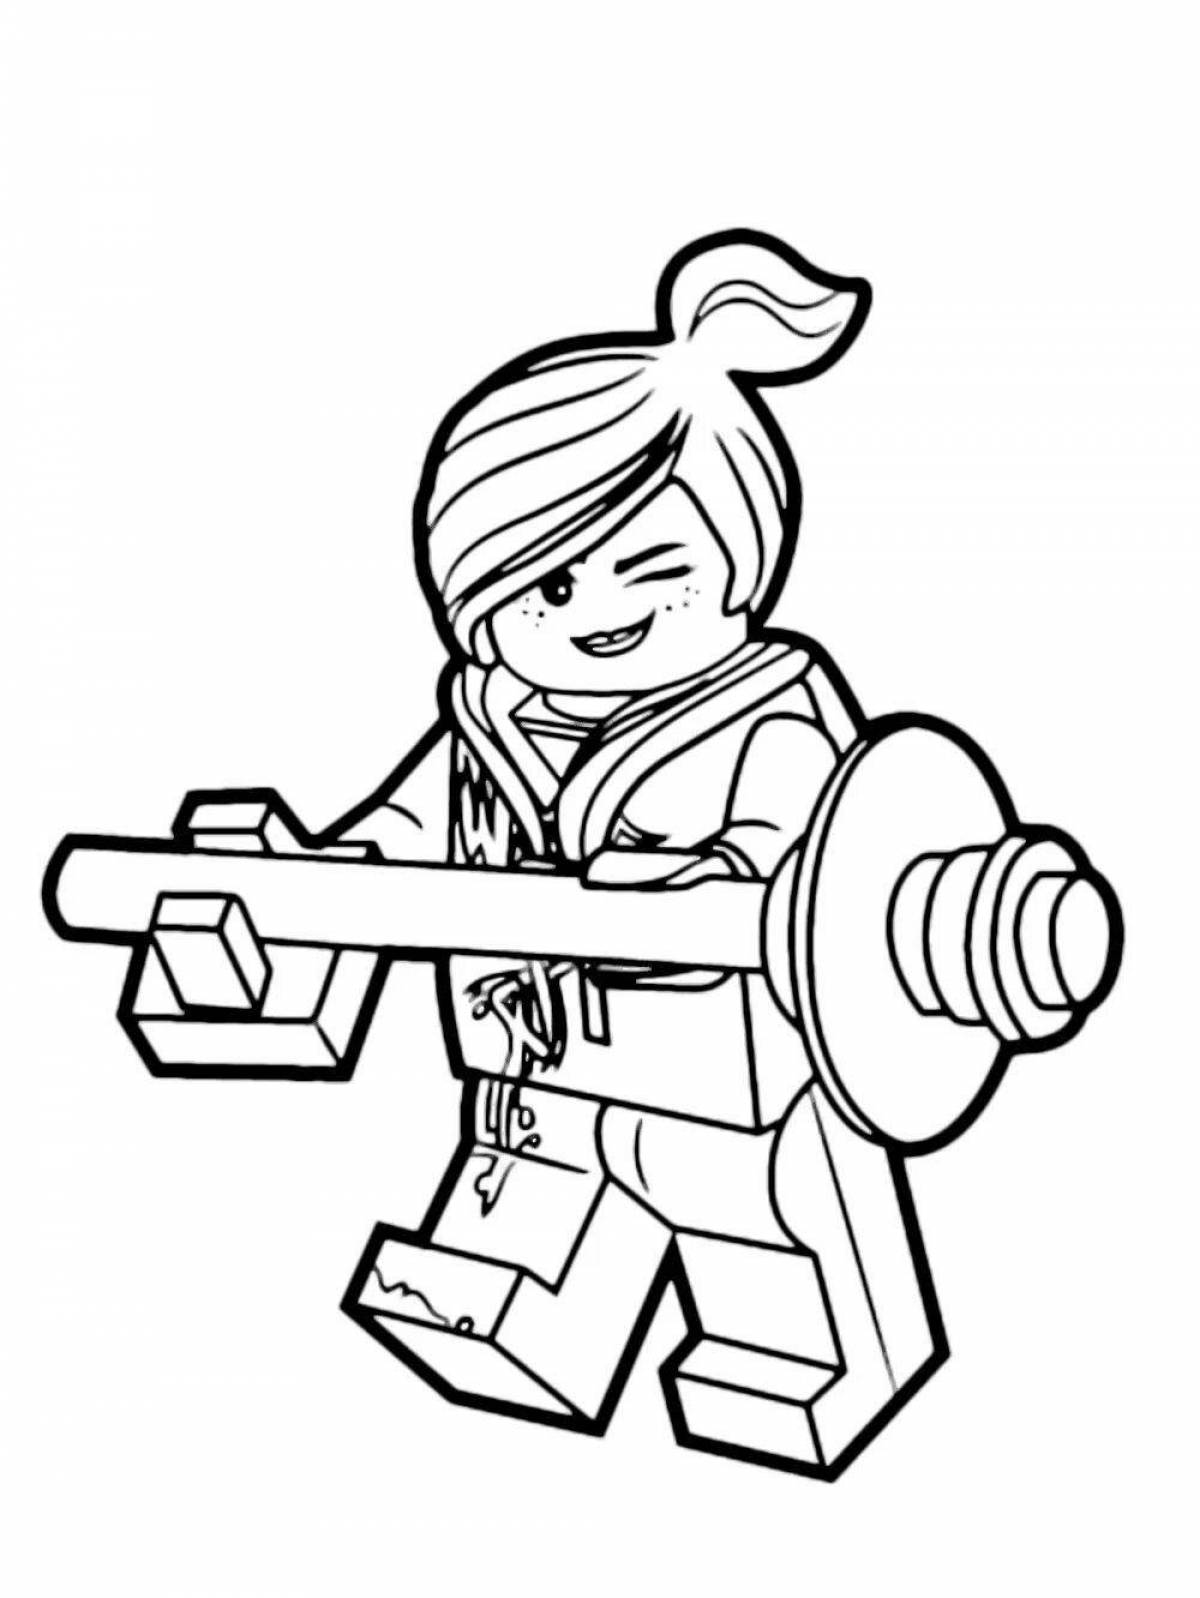 Attractive roblox coloring book for girls